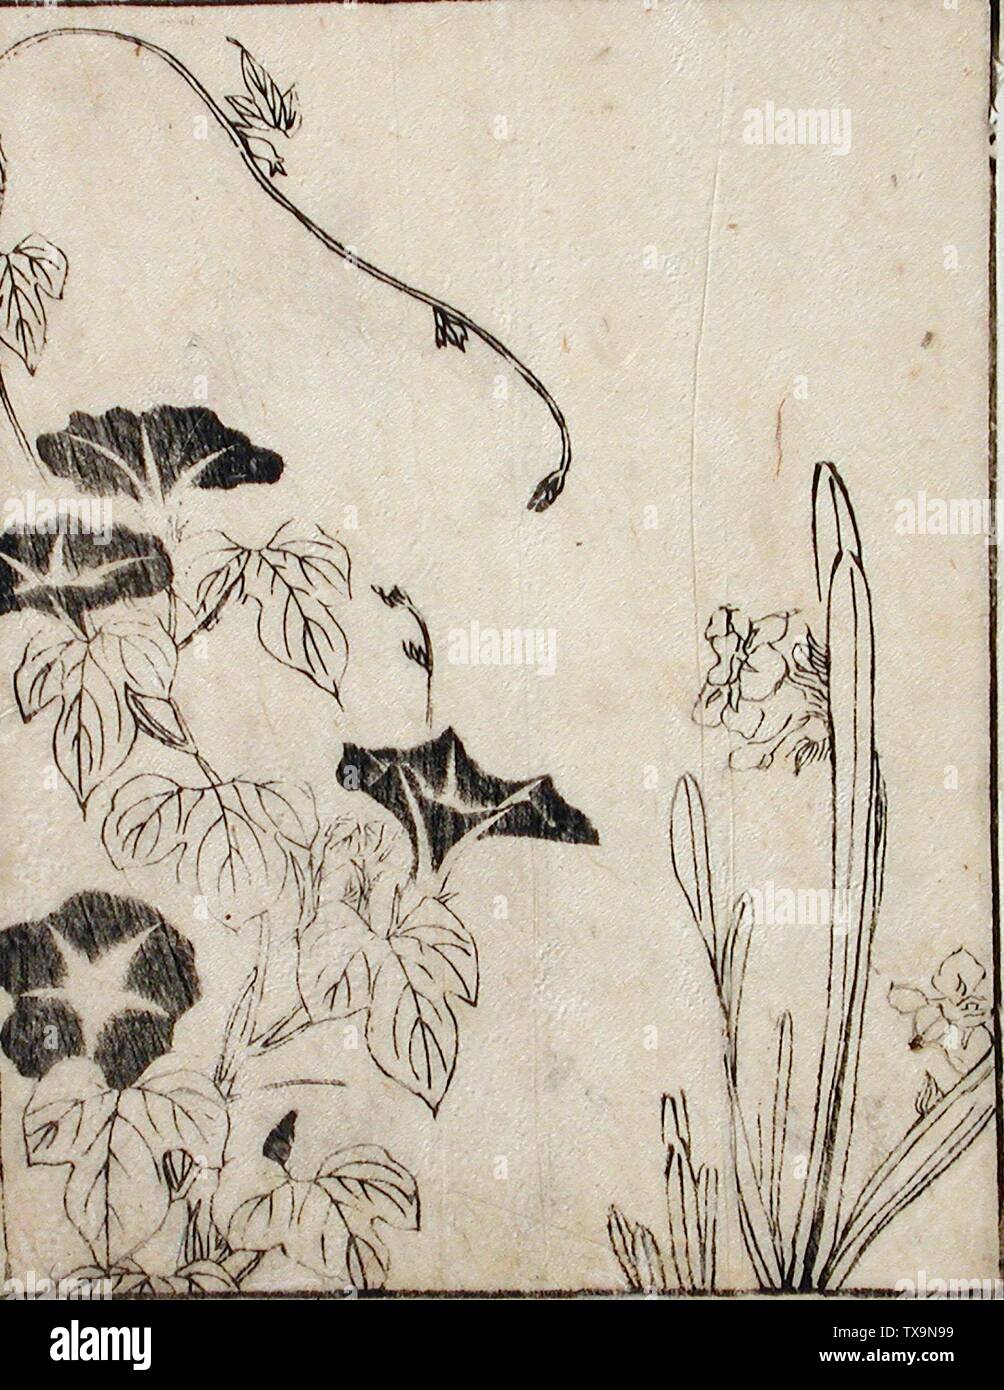 Morning Glory and Daffodil;  Japan, late 18th - early 19th century Prints; woodcuts Black and white woodbk print from a book Image:  8 1/8 x 6 3/8 in. (20.64 x 16.19 cm); Sheet:  8 5/16 x 6 9/16 in. (21.11 x 16.67 cm) Gift of Ruth and Milton Hecht (M.2000.104.12) Japanese Art; Late 18th - early 19th century; Stock Photo